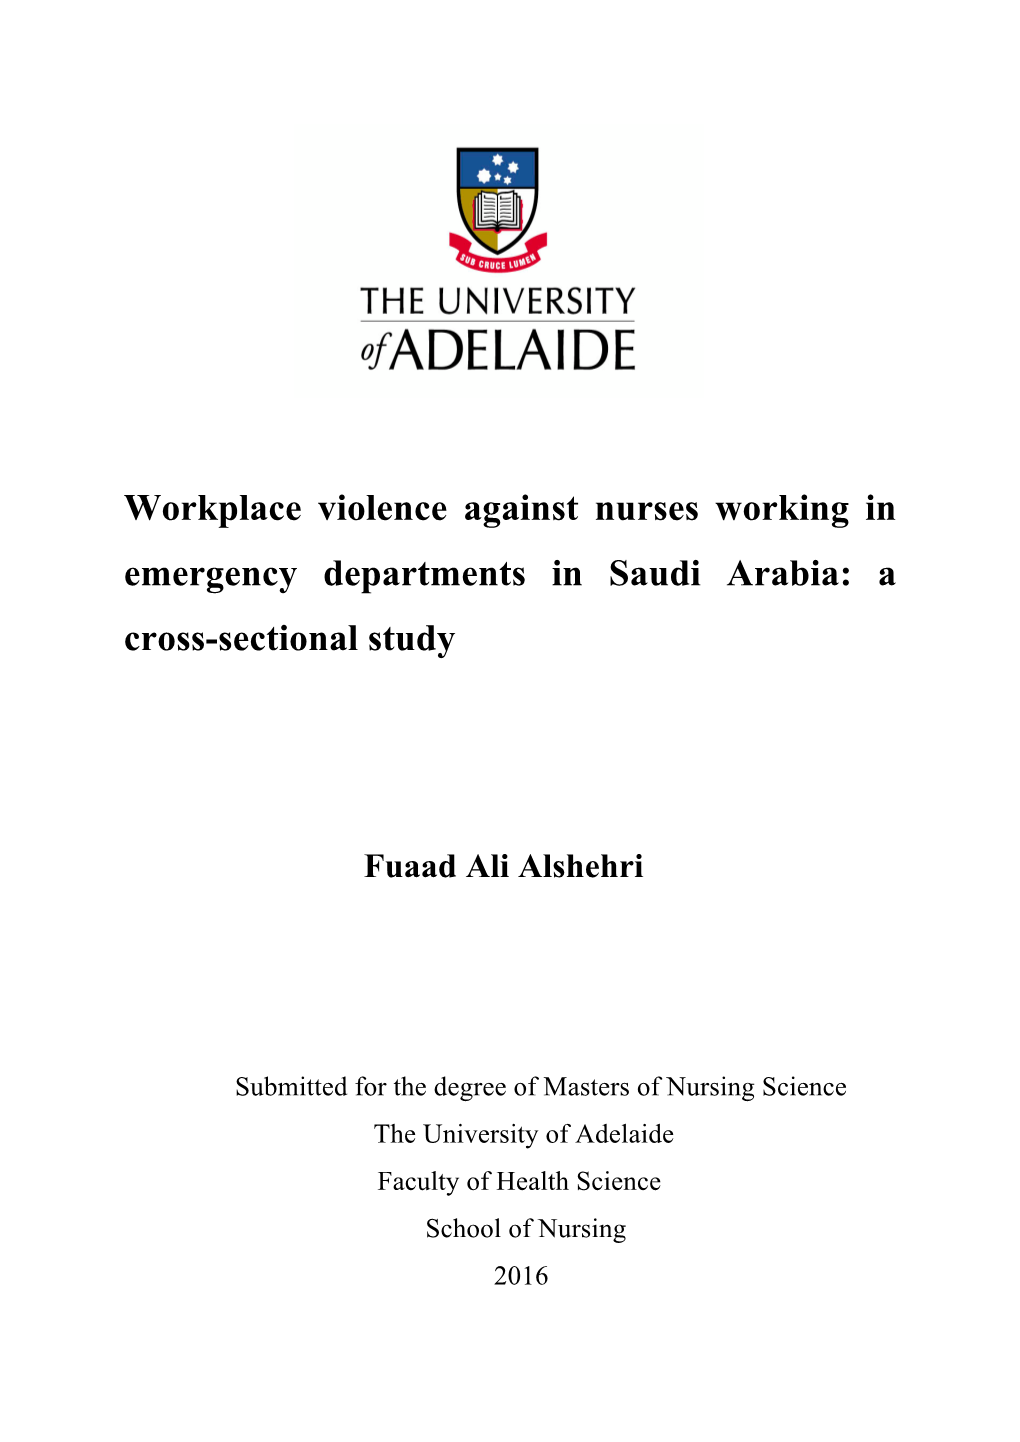 Workplace Violence Against Nurses Working in Emergency Departments in Saudi Arabia: a Cross-Sectional Study